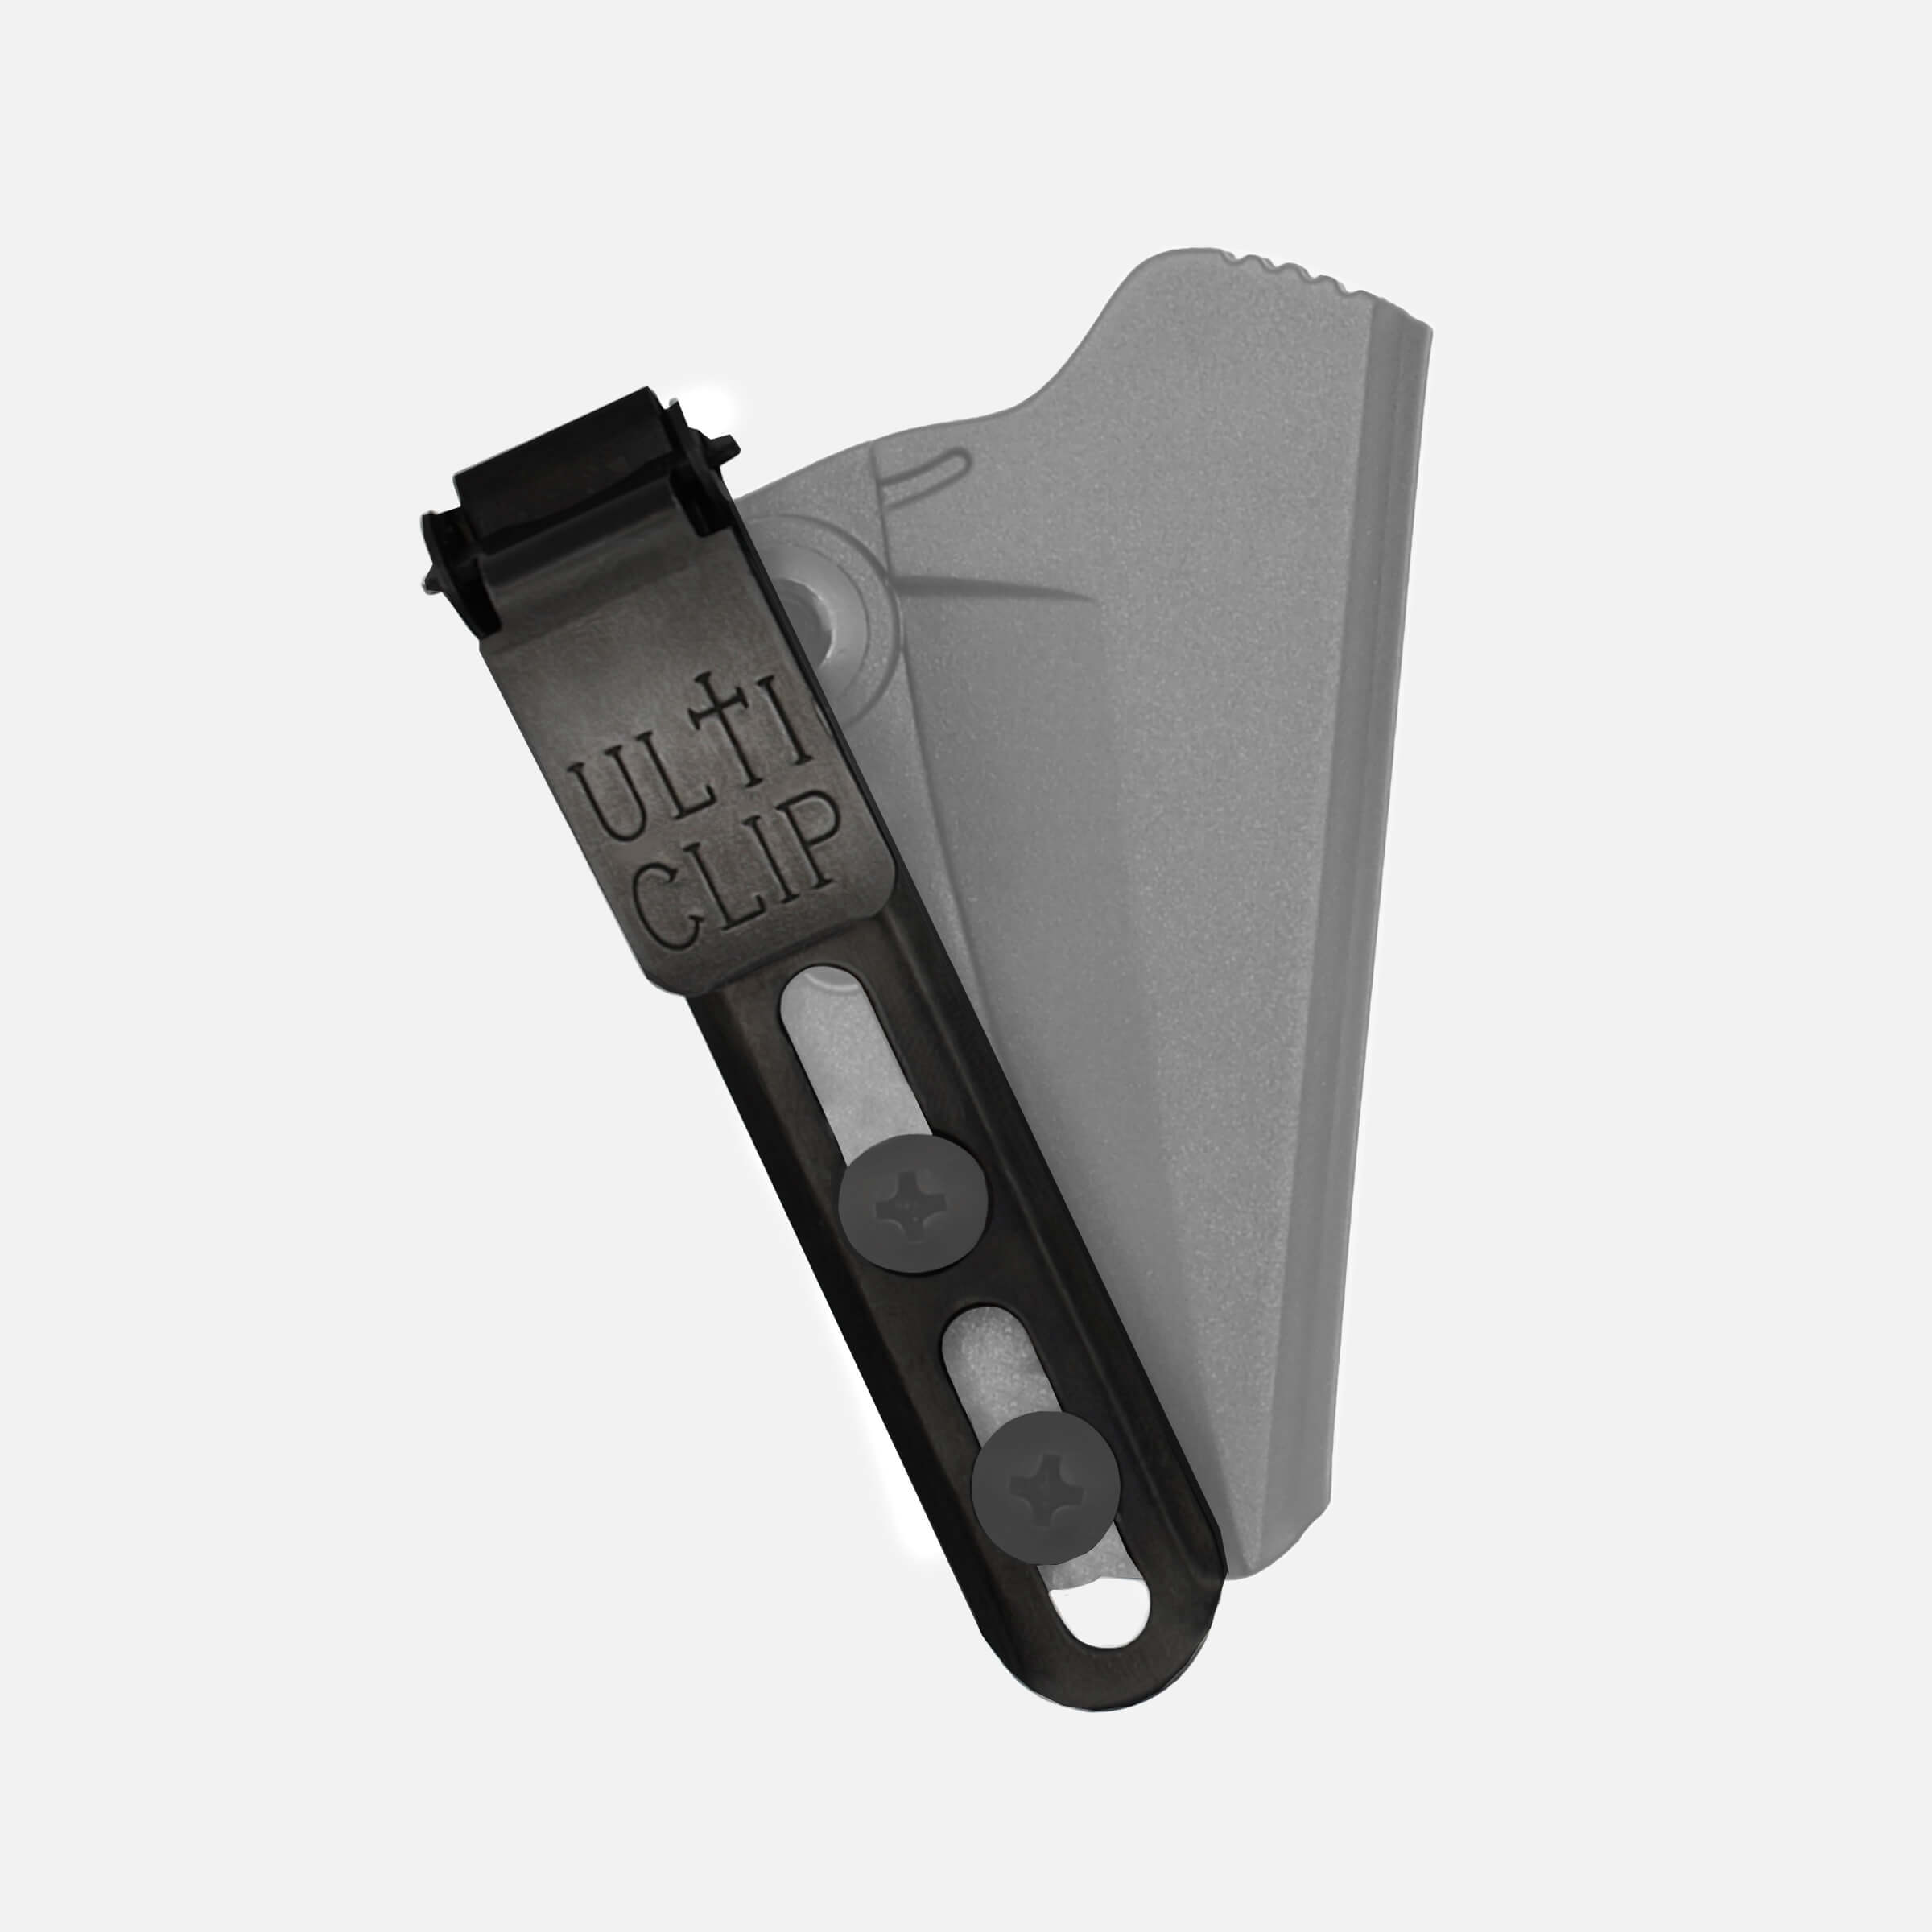 ULTICLIP Slim 3.3 Fixed Blade Clip for Belt-Less Carry